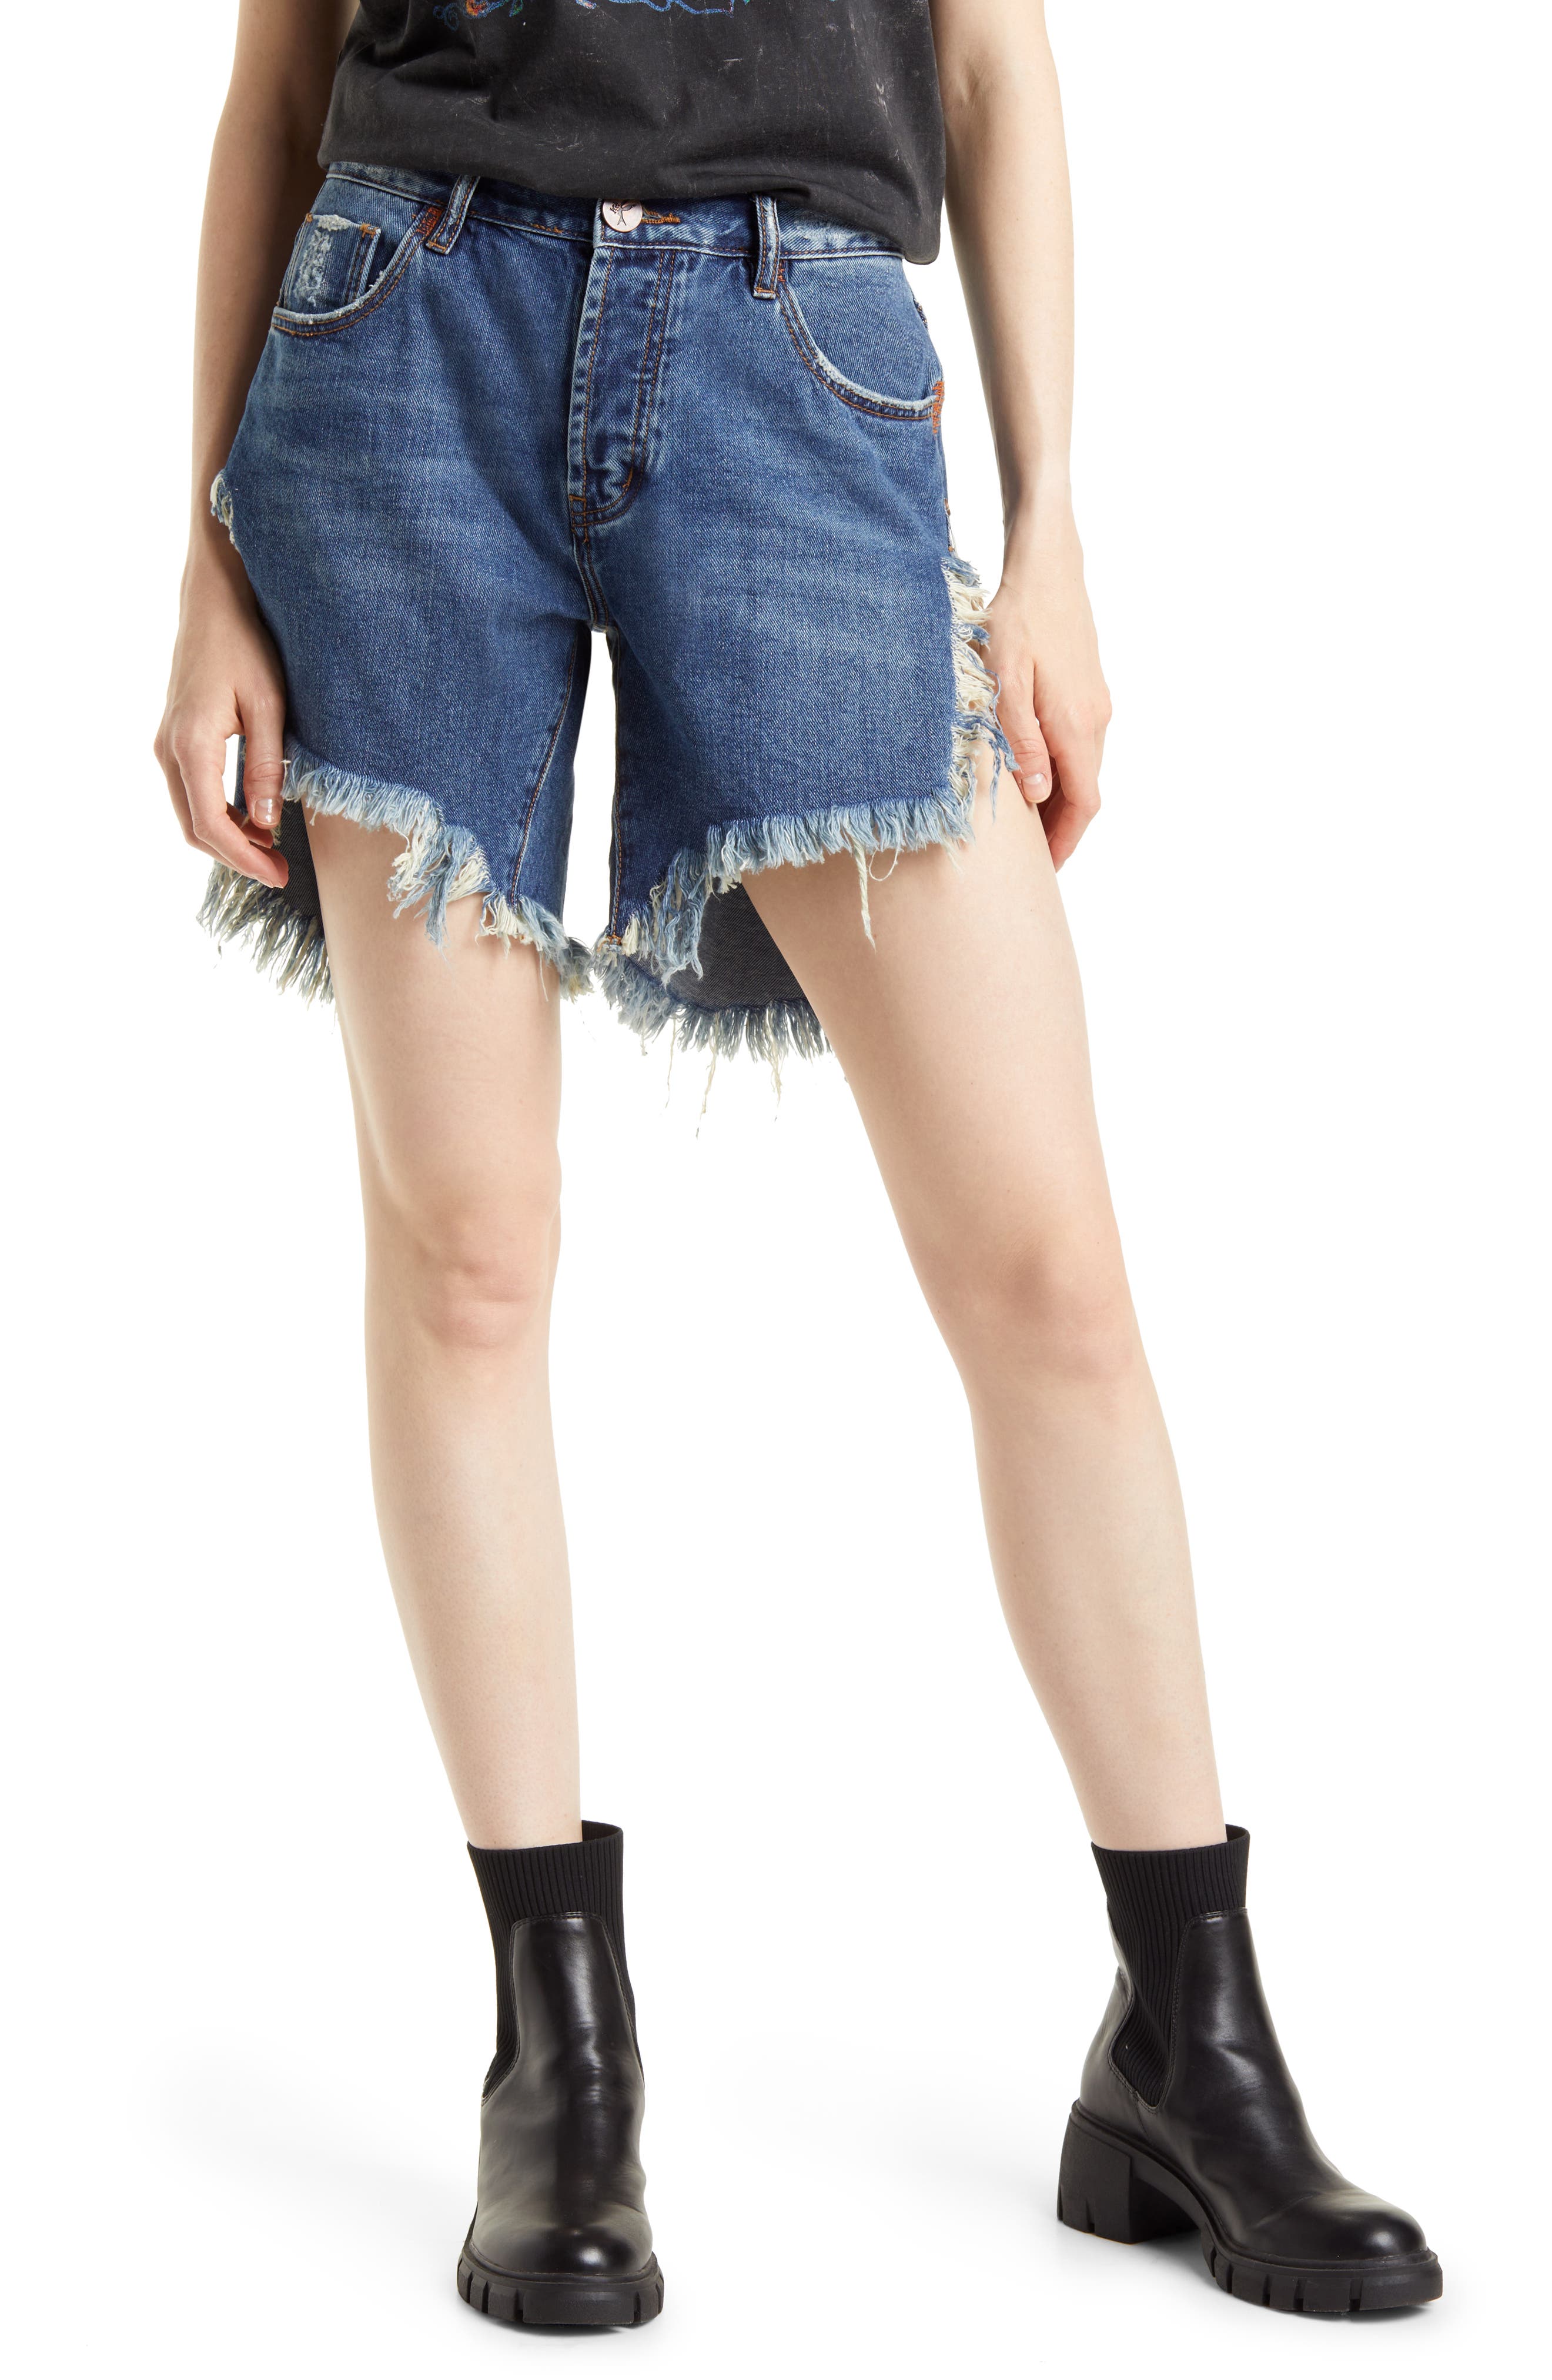 discount 63% WOMEN FASHION Jeans Shorts jeans Ripped NoName shorts jeans Blue M 